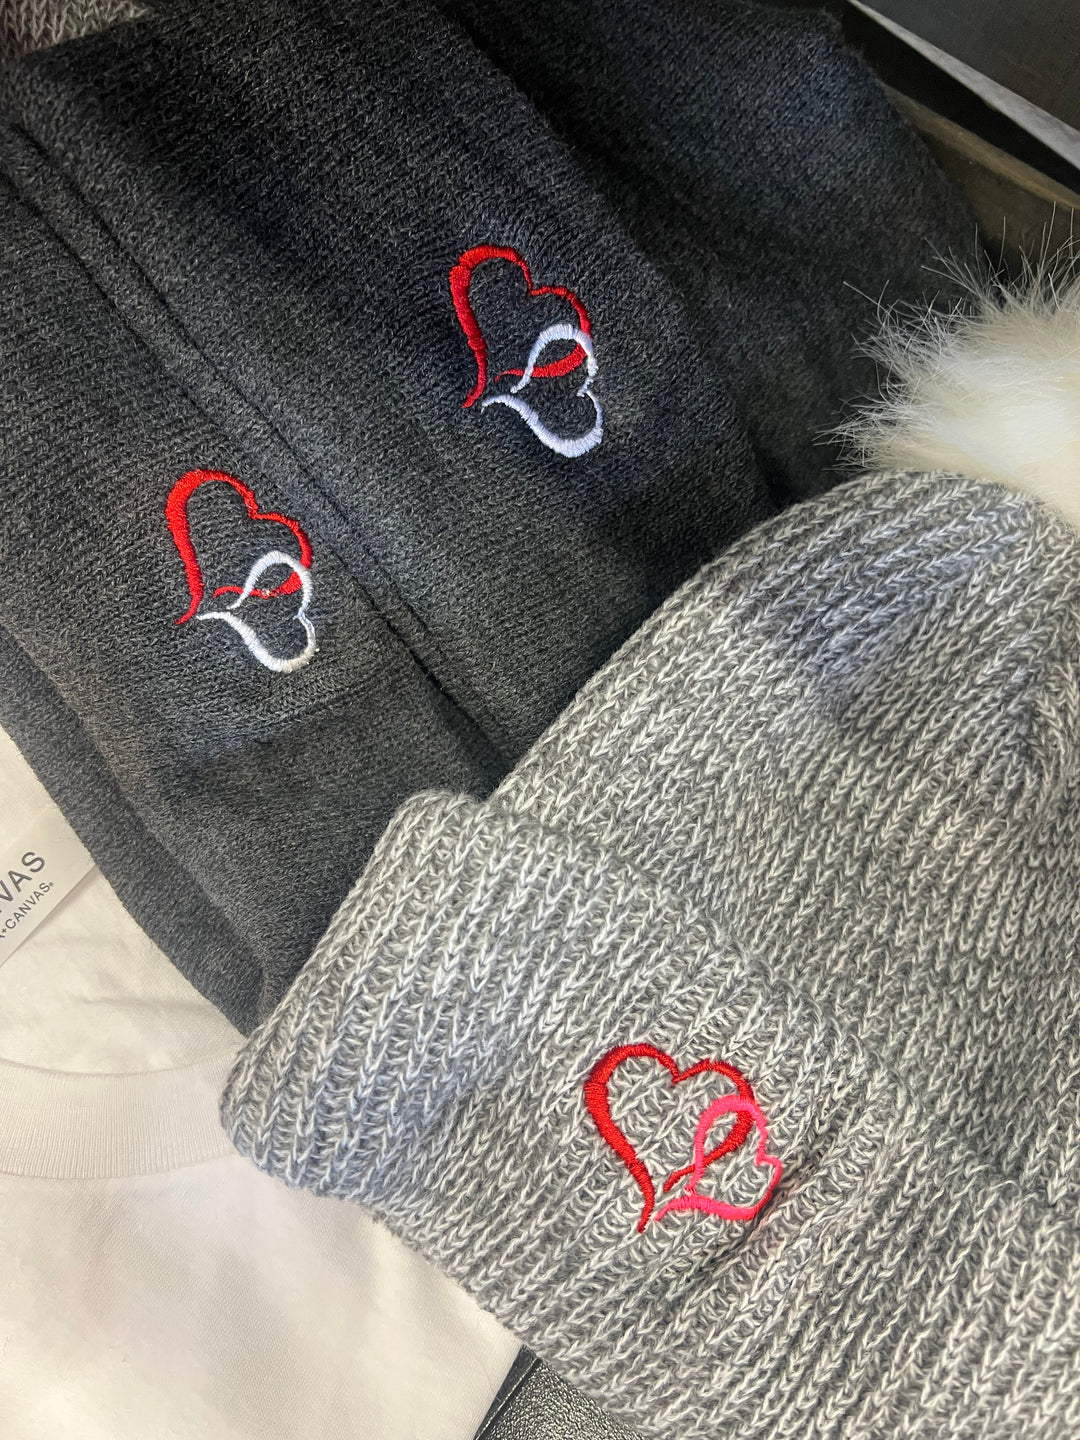 Heart Embroidered Beanie